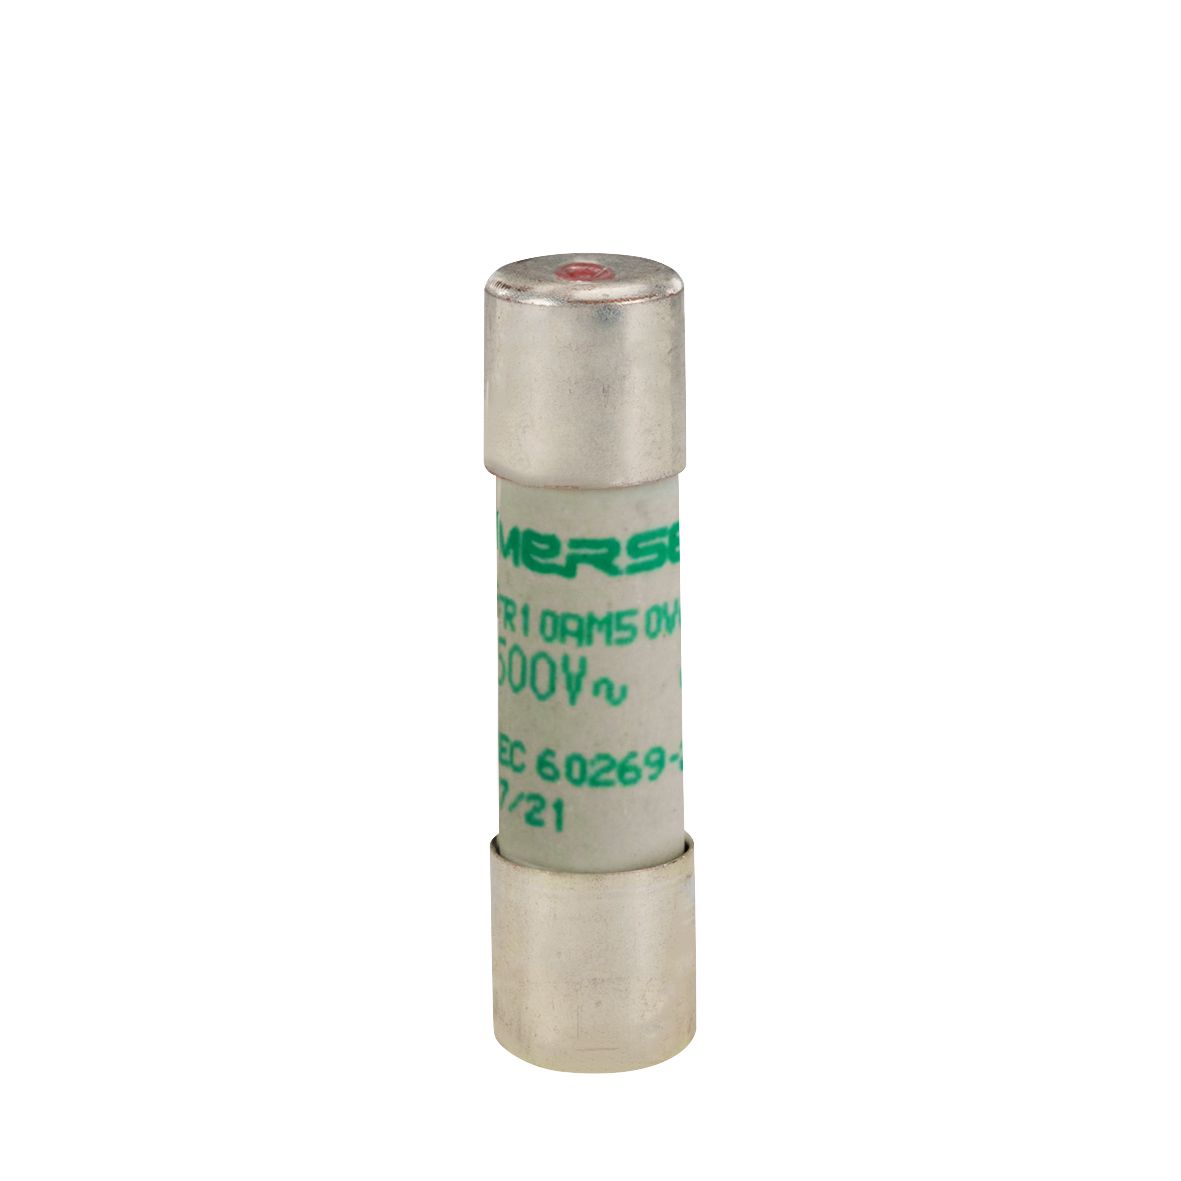 Z211553 - Cylindrical fuse-link aM 500VAC 10.3x38, 8A with indicator